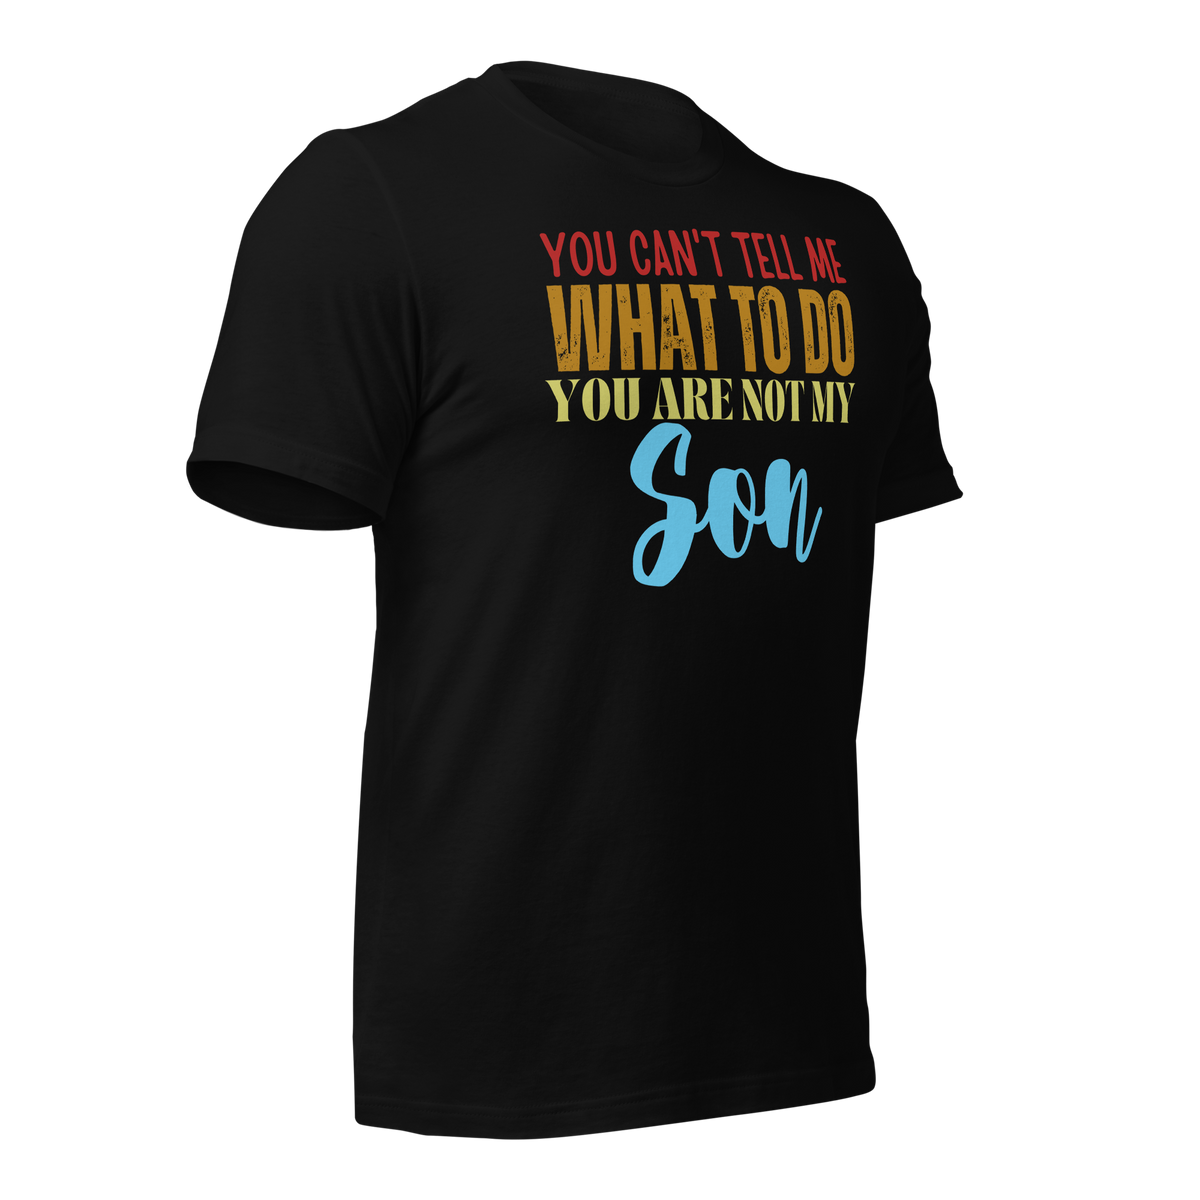 Dad Shirt, Fathers Day Shirt, Funny Mens Shirt, Funny Dad Shirt, Tell me what to do, Gift for him, Gift for her, New Papa Gift, Funny Mom Shirt, Mom Shirt, New Dad Shirt, Father Shirt, Dad tee, You Can't tell me What To Do You Are Not My son Shirt, T-Shirt, tee